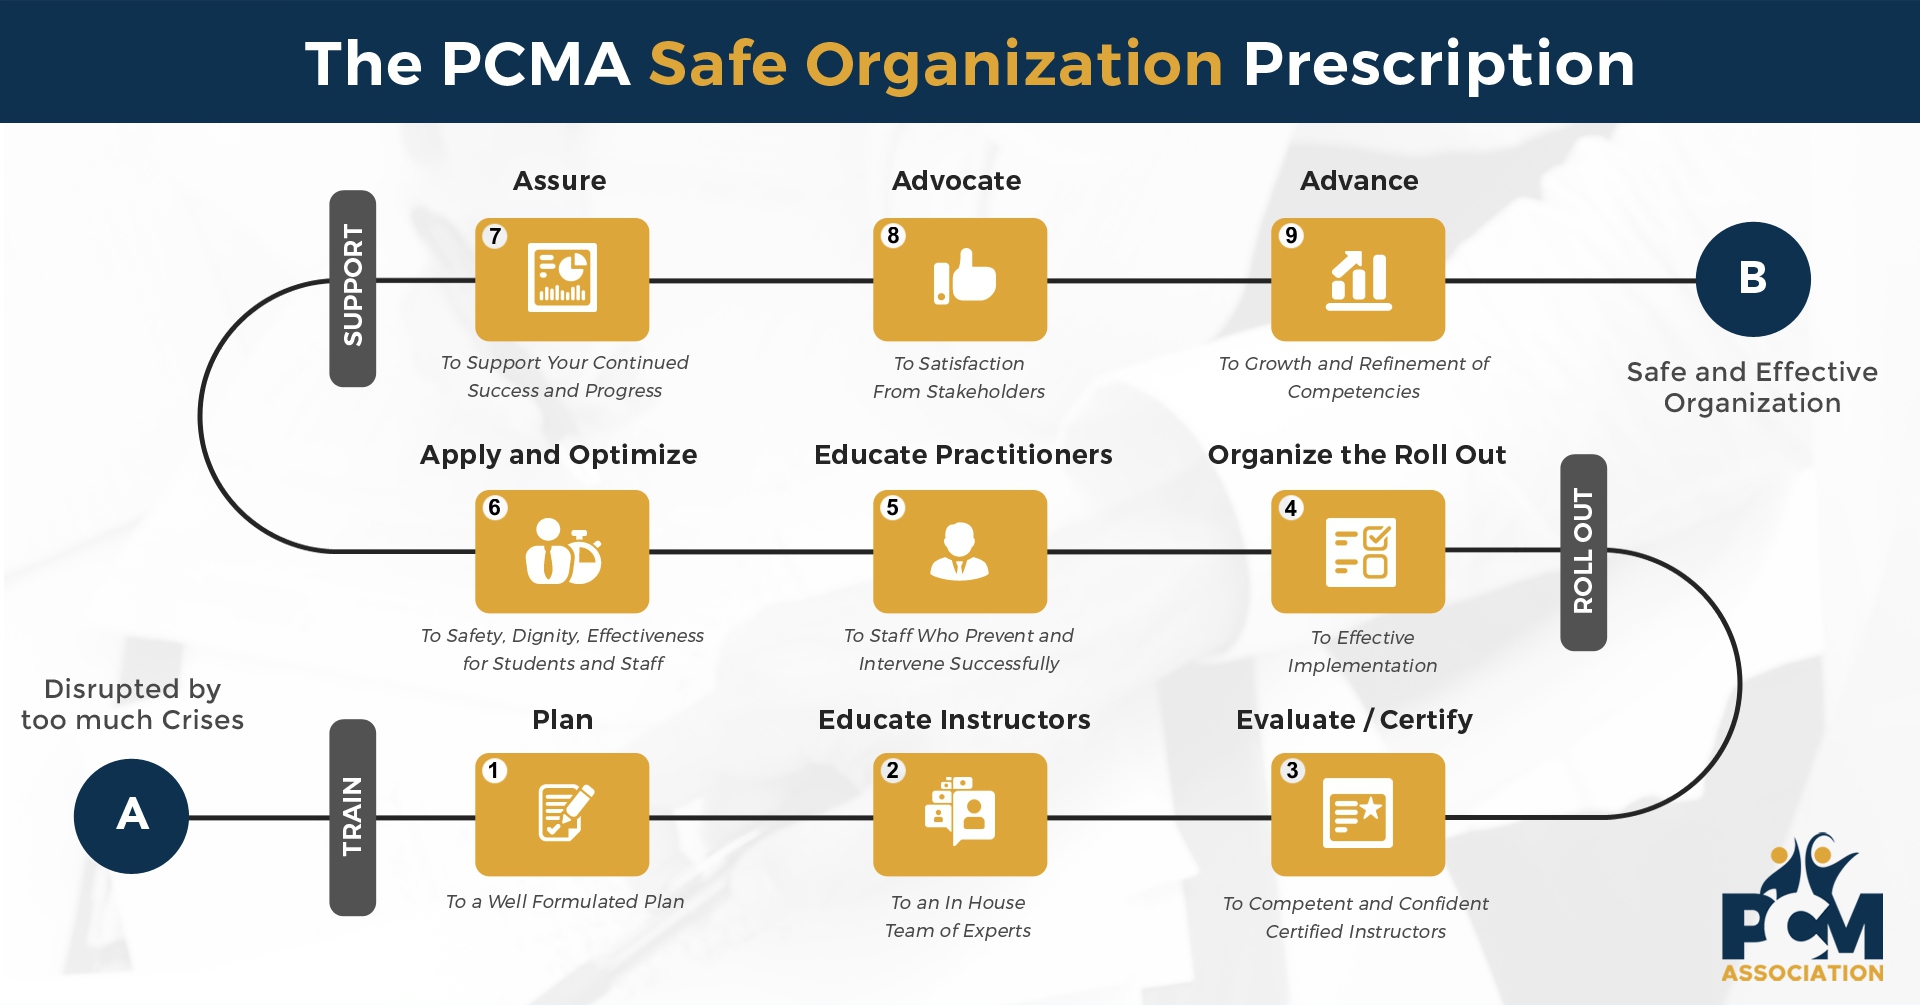 The PCMA Safe Organization prescription helps your organization with its 9 step process